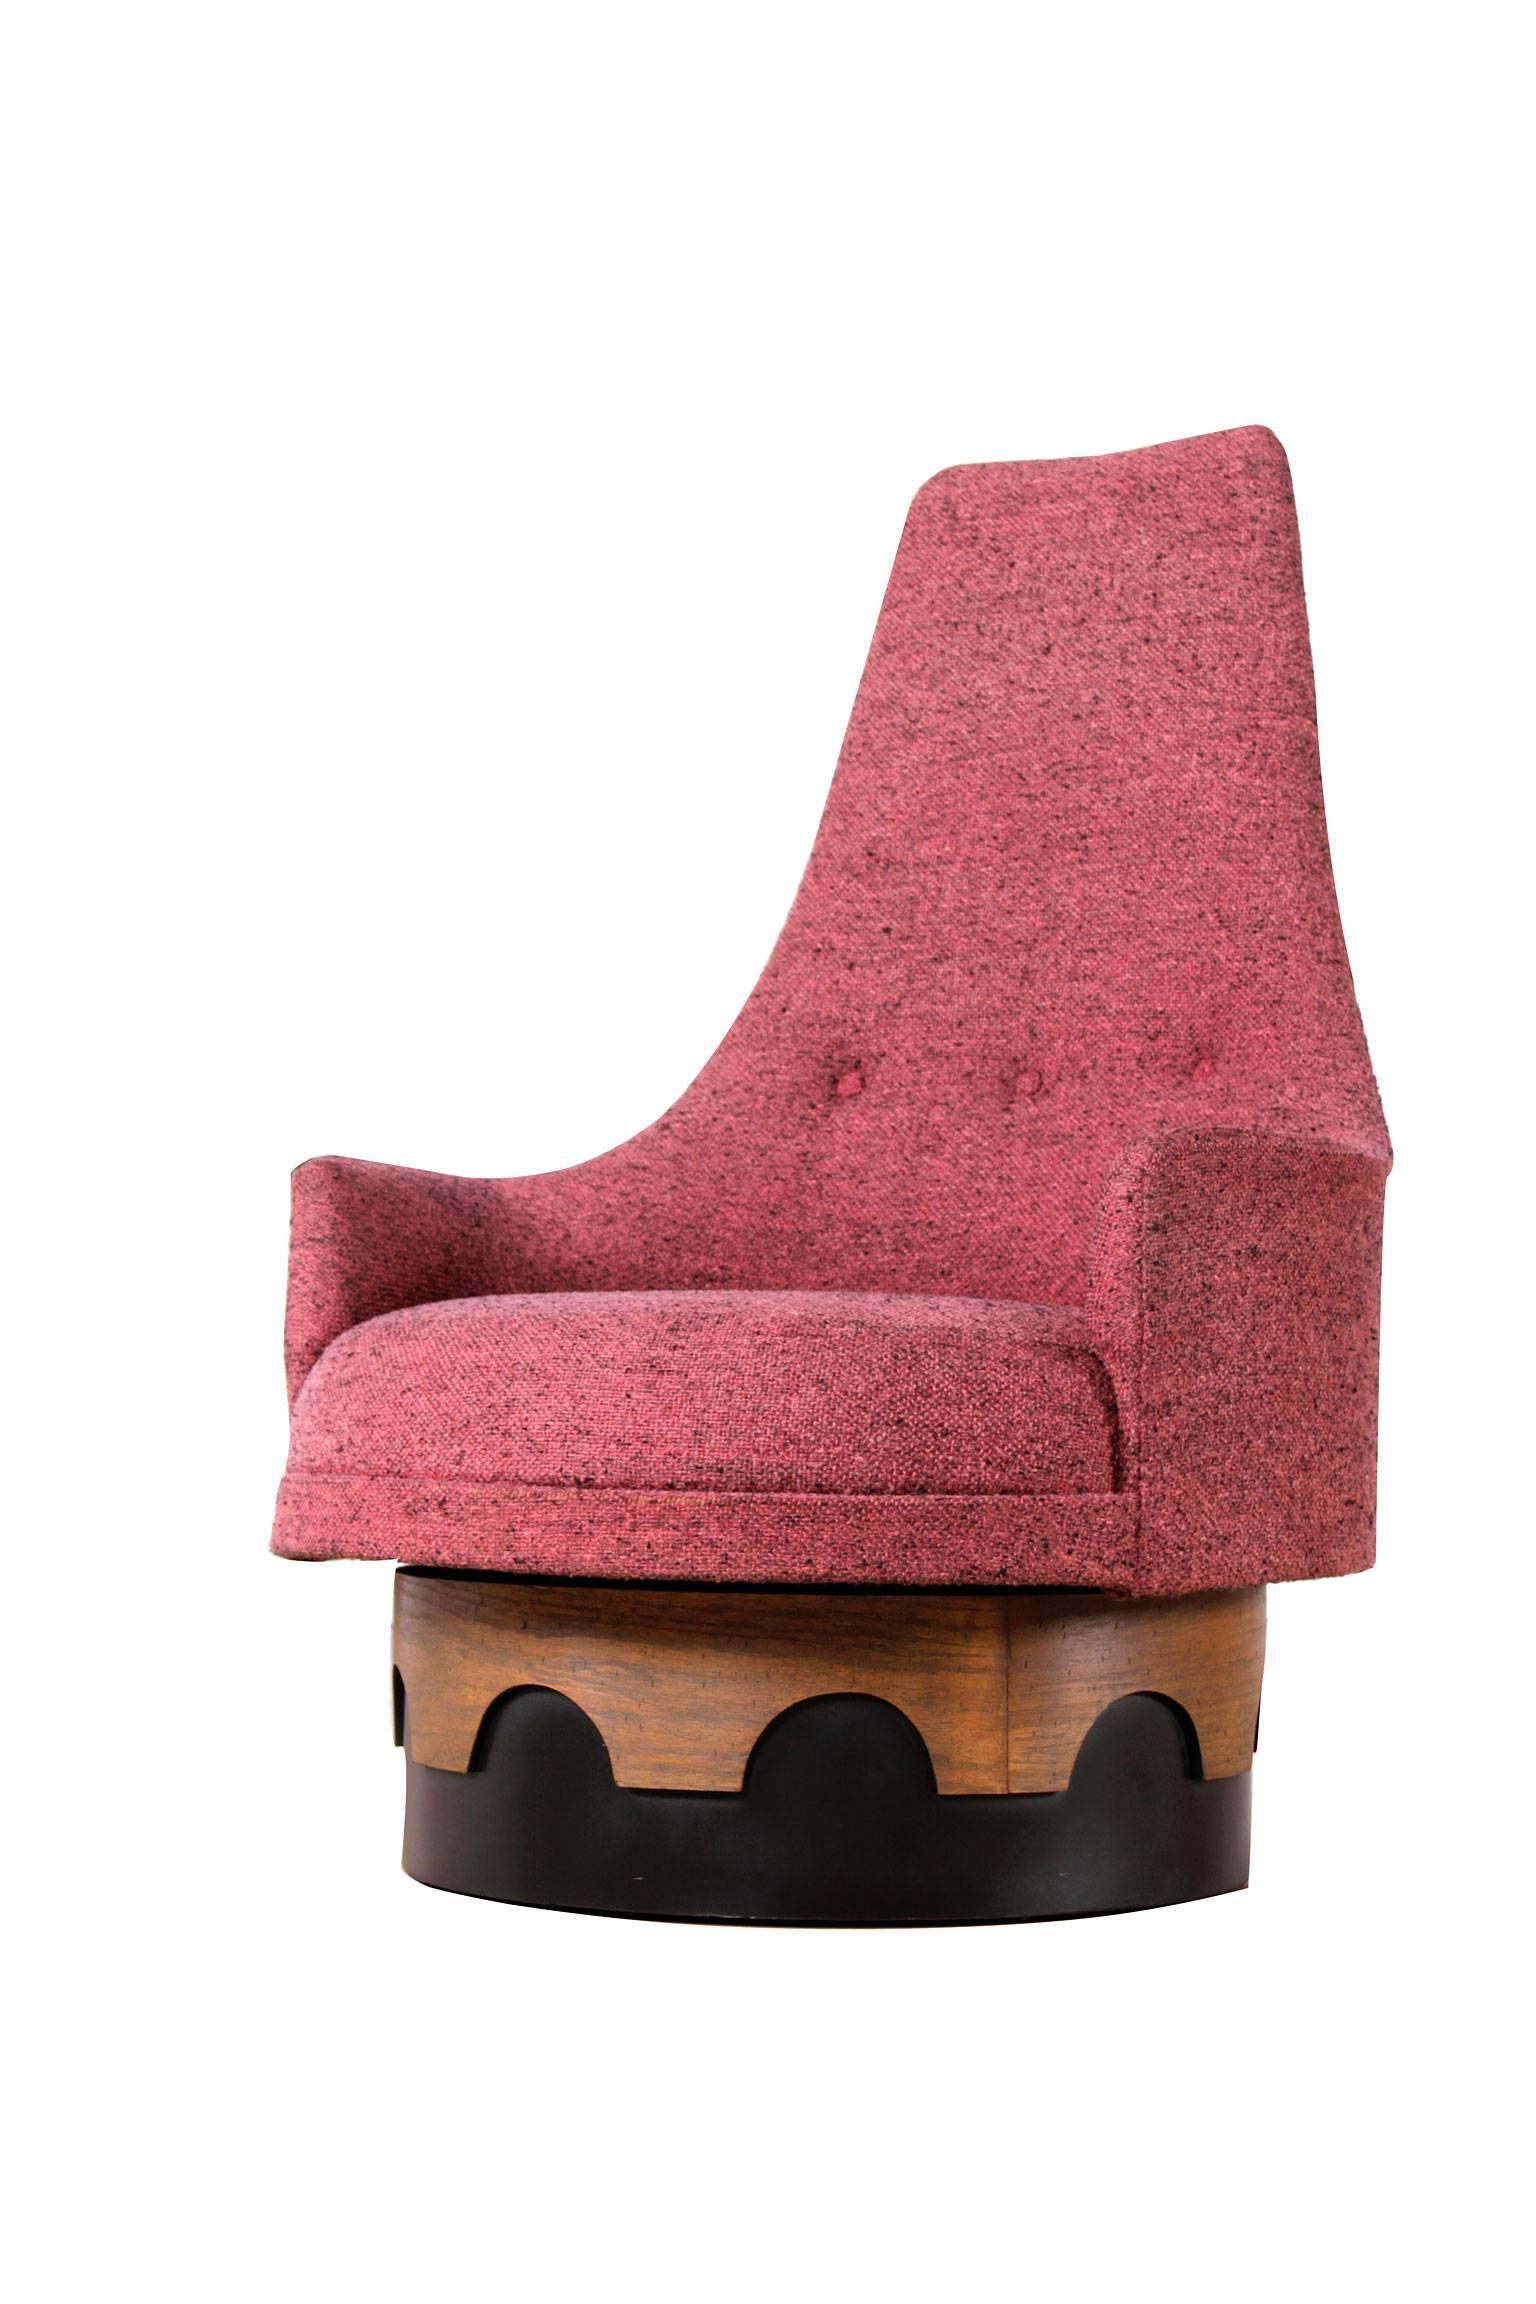 Vintage Adrian Pearsall high back swivel lounge chair from his “Strictly Spanish” collection for Craft Associates. This time capsule piece boasts original fuchsia tweed upholstery in stellar condition. The chair has been professionally steam cleaned